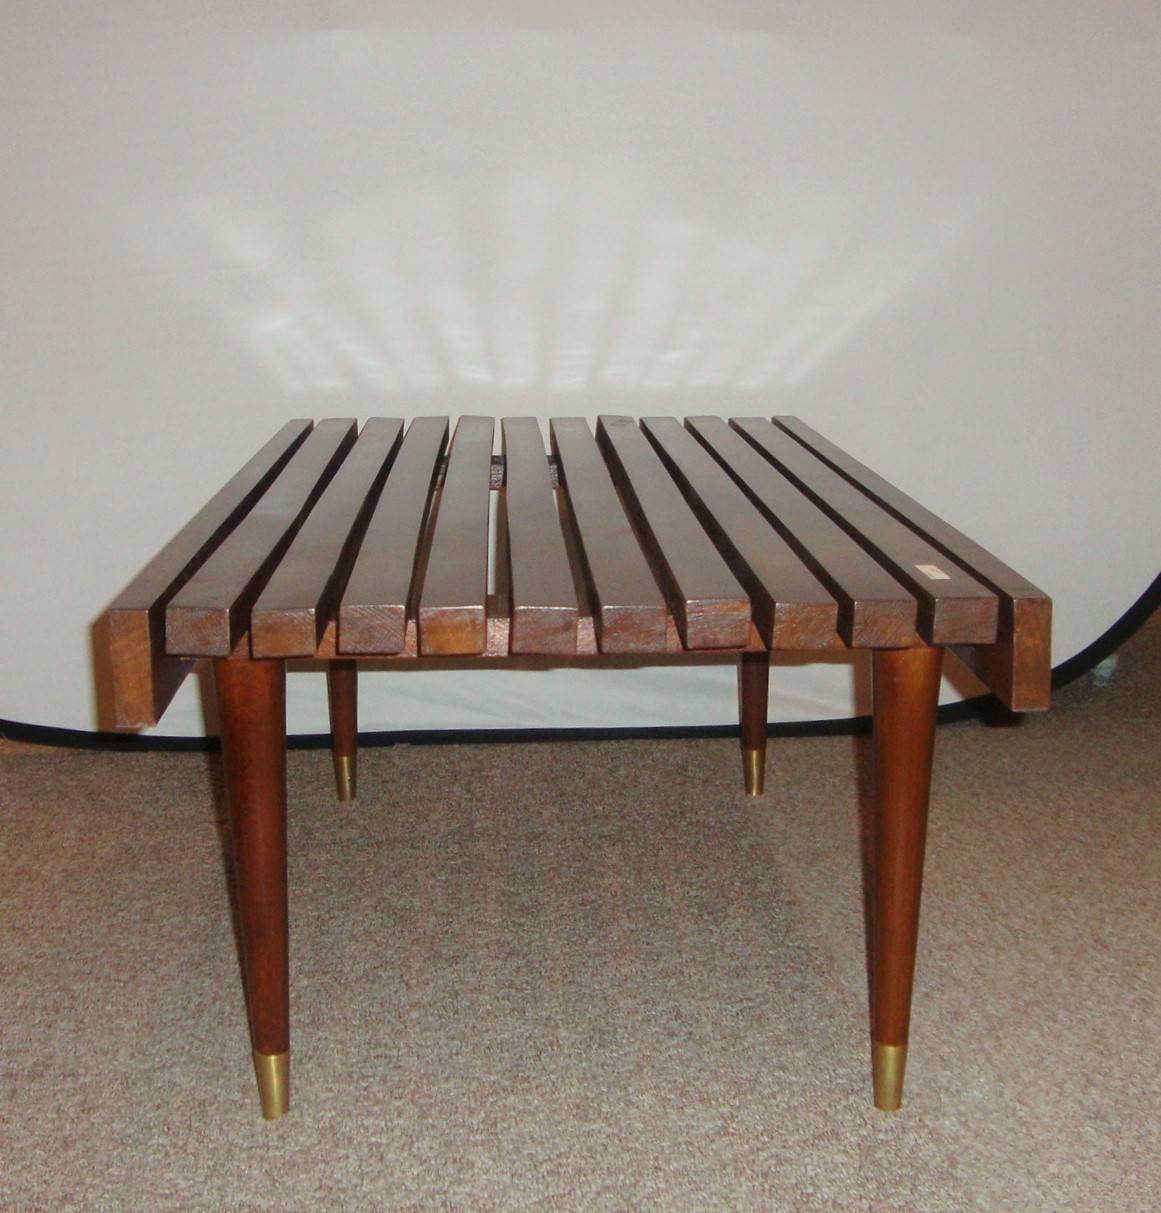 Wood Danish Designer, Mid-Century Modern, Small Coffee Table, Brown Slat Bench, 1970s For Sale